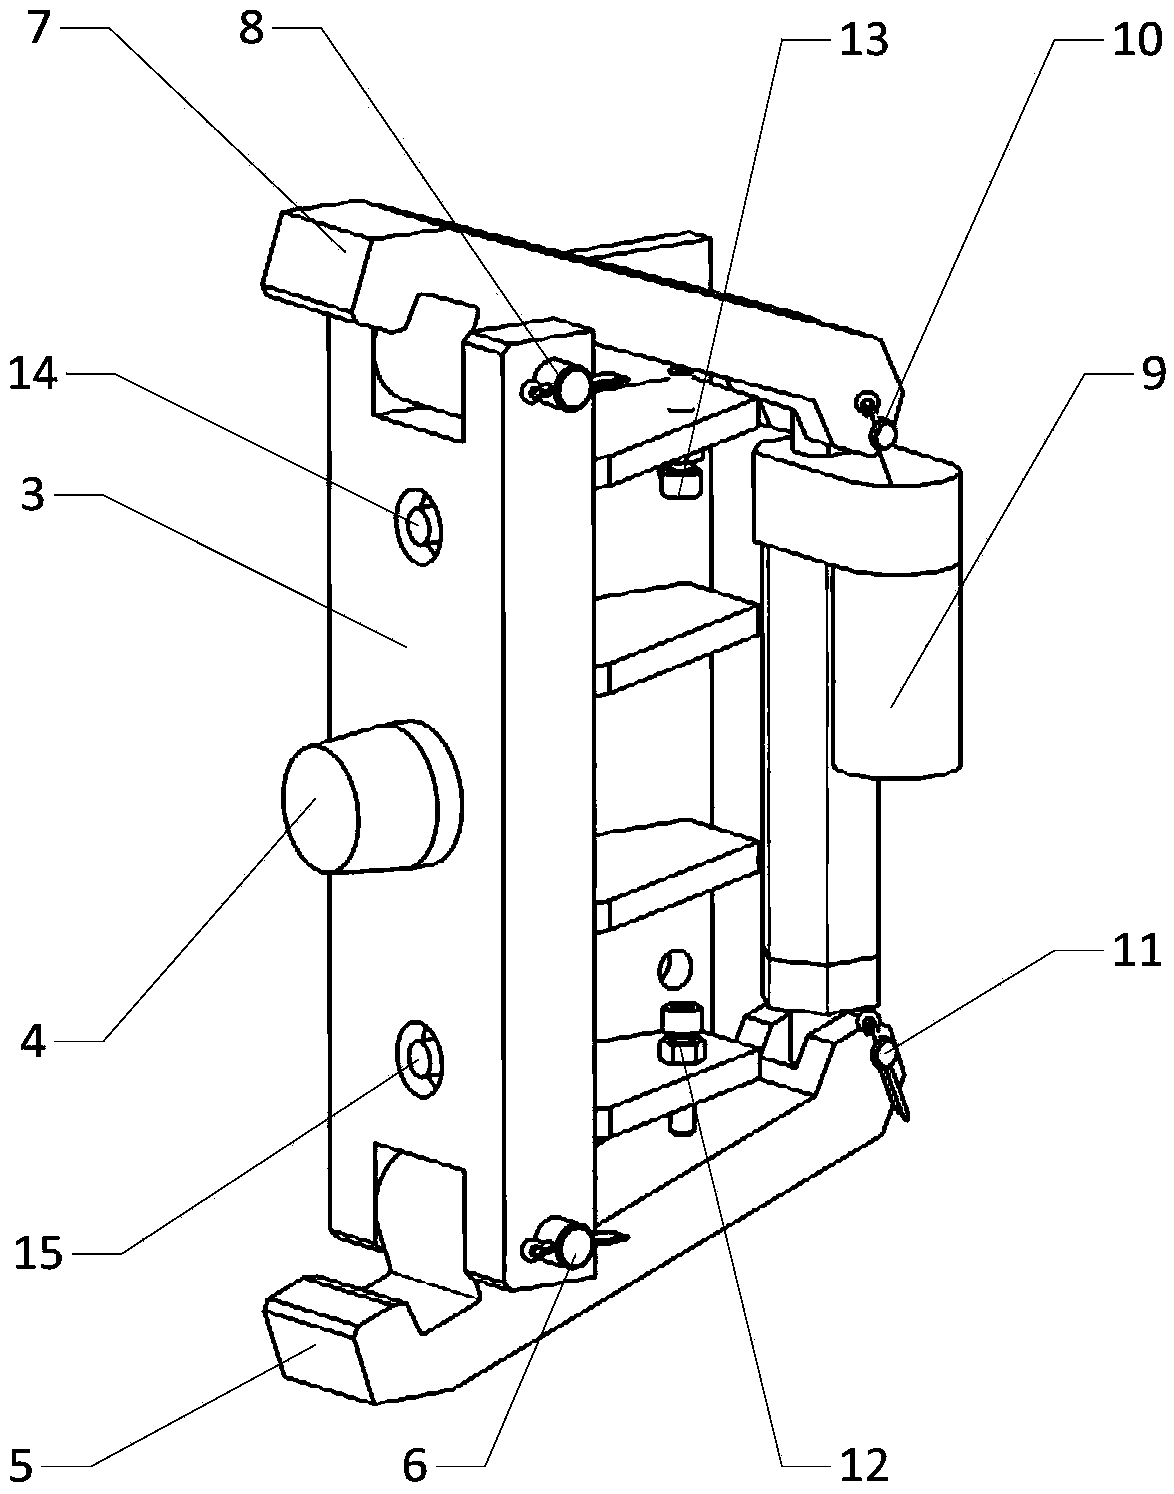 Positioning lock mechanism for connecting multiple automobiles